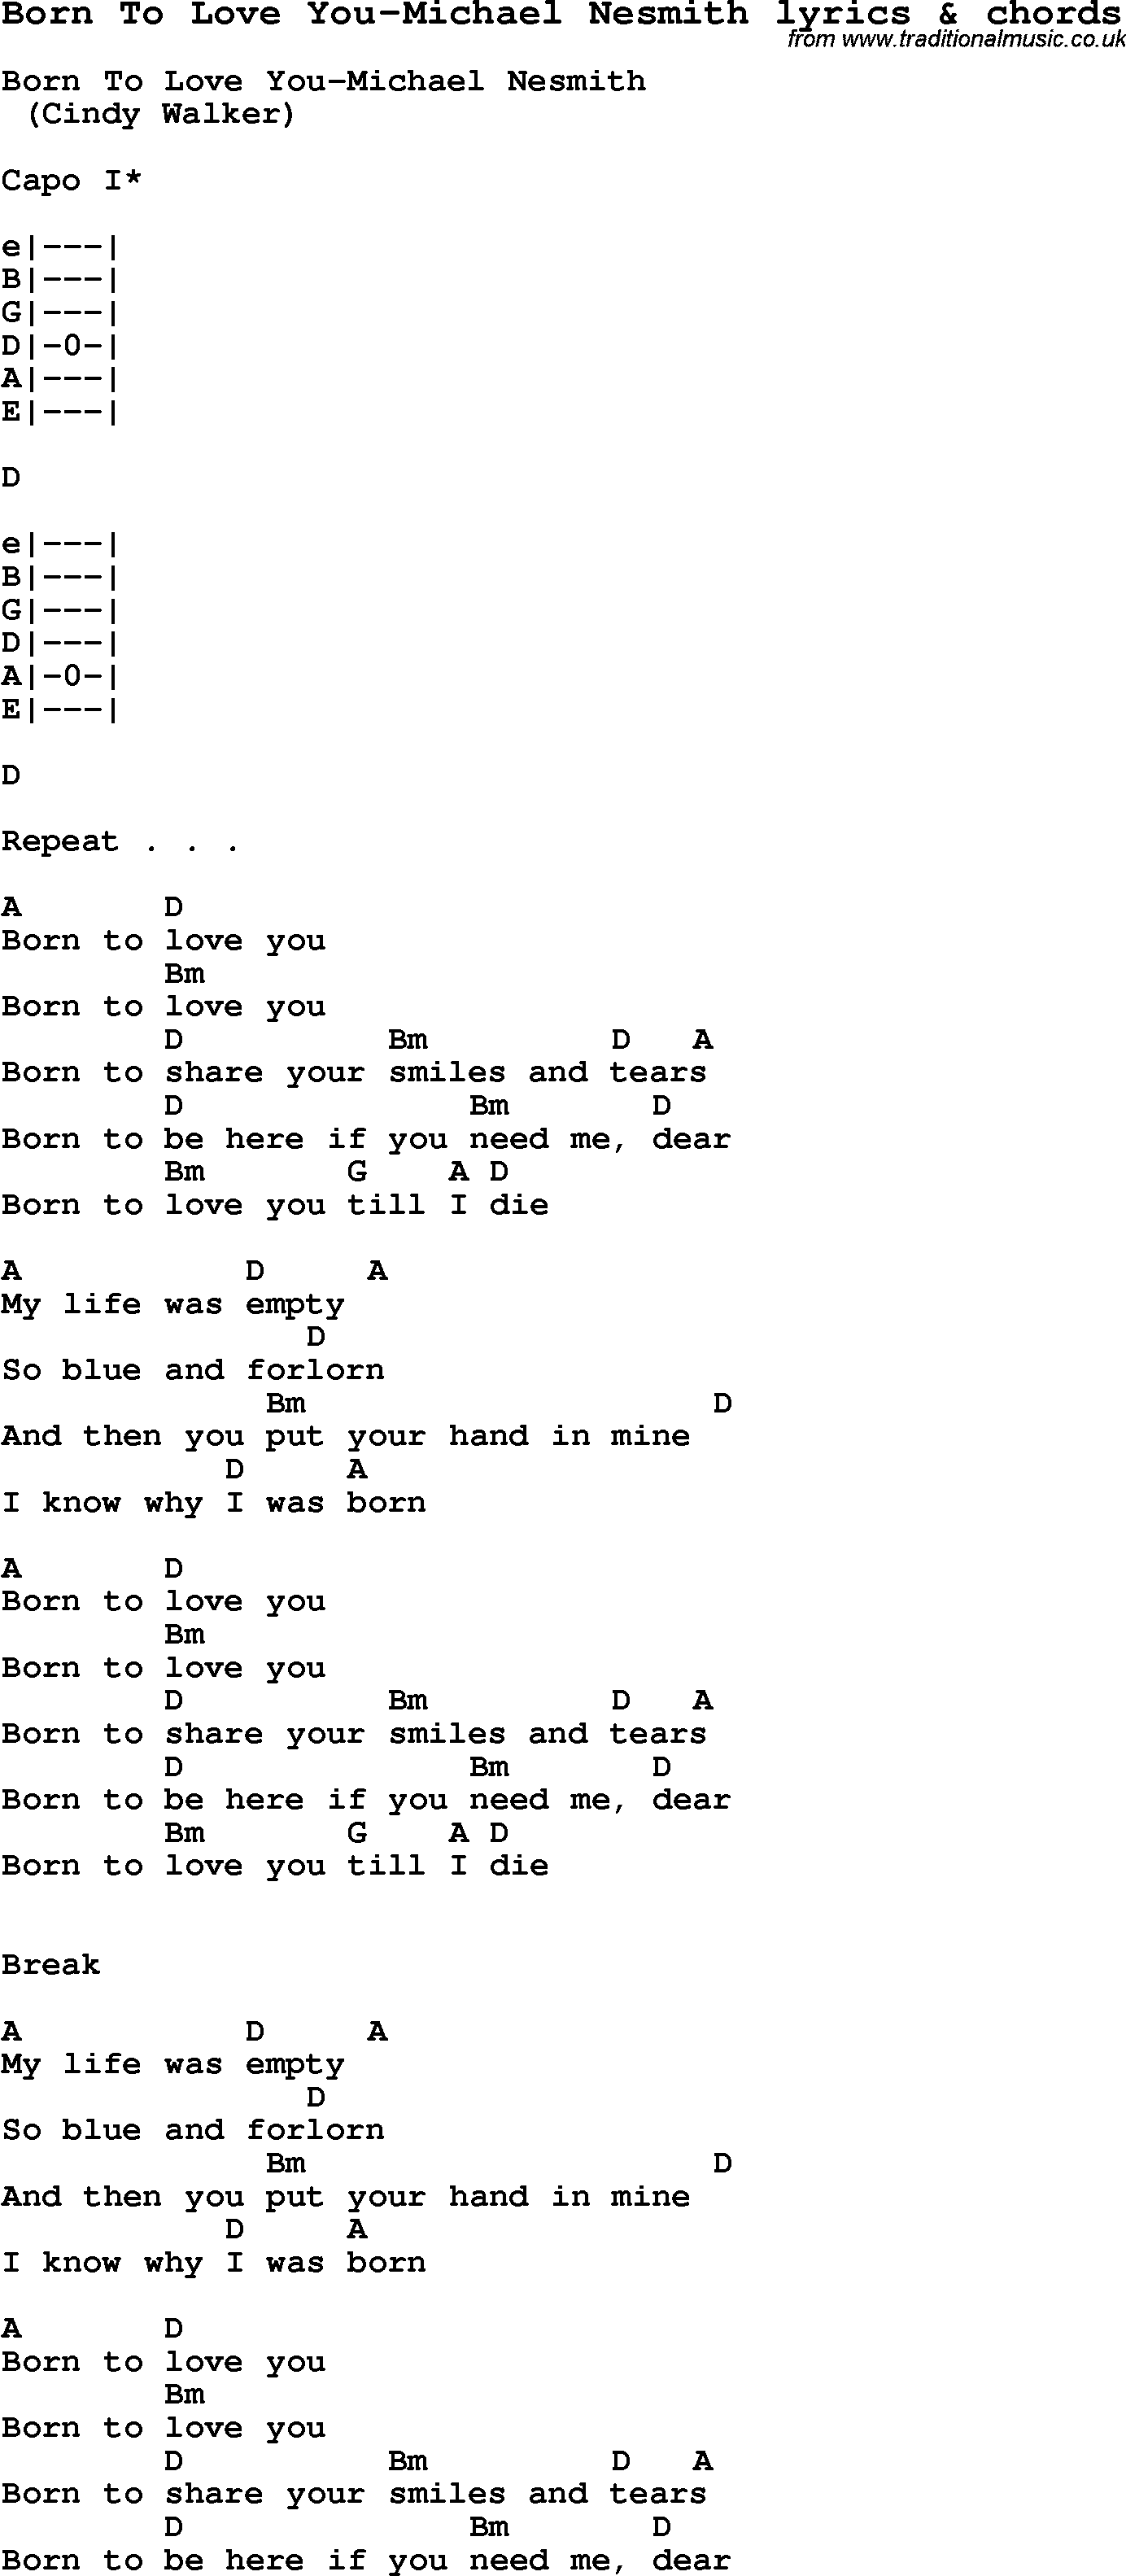 Love Song Lyrics for: Born To Love You-Michael Nesmith with chords for Ukulele, Guitar Banjo etc.